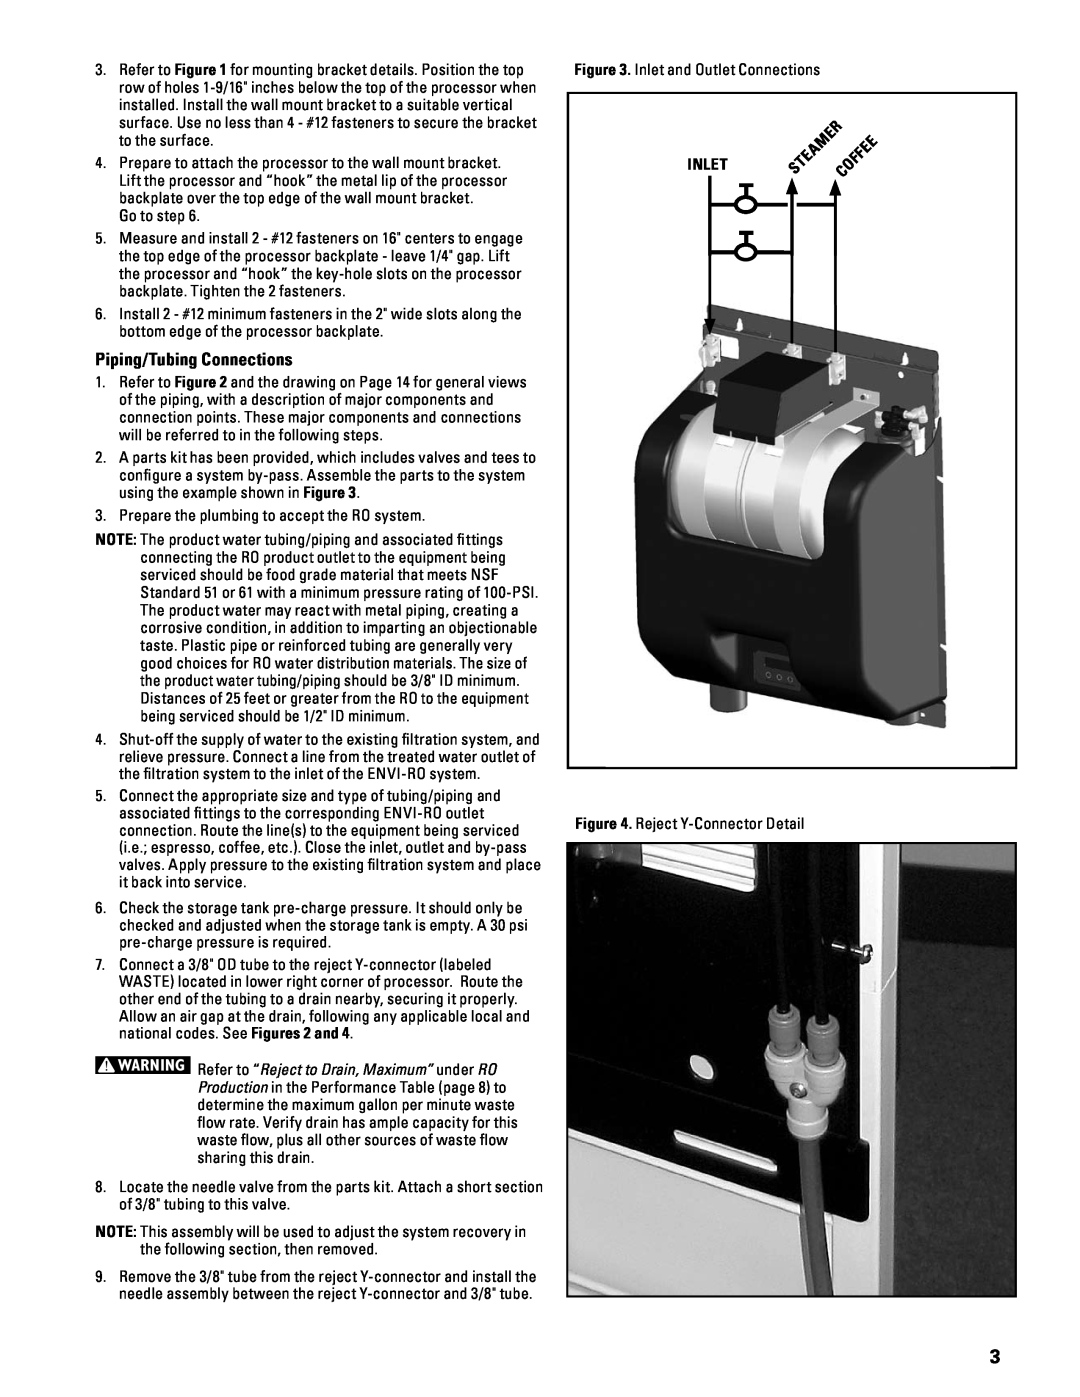 Everpure ENVI-RO installation and operation guide Piping/Tubing Connections, Inlet 